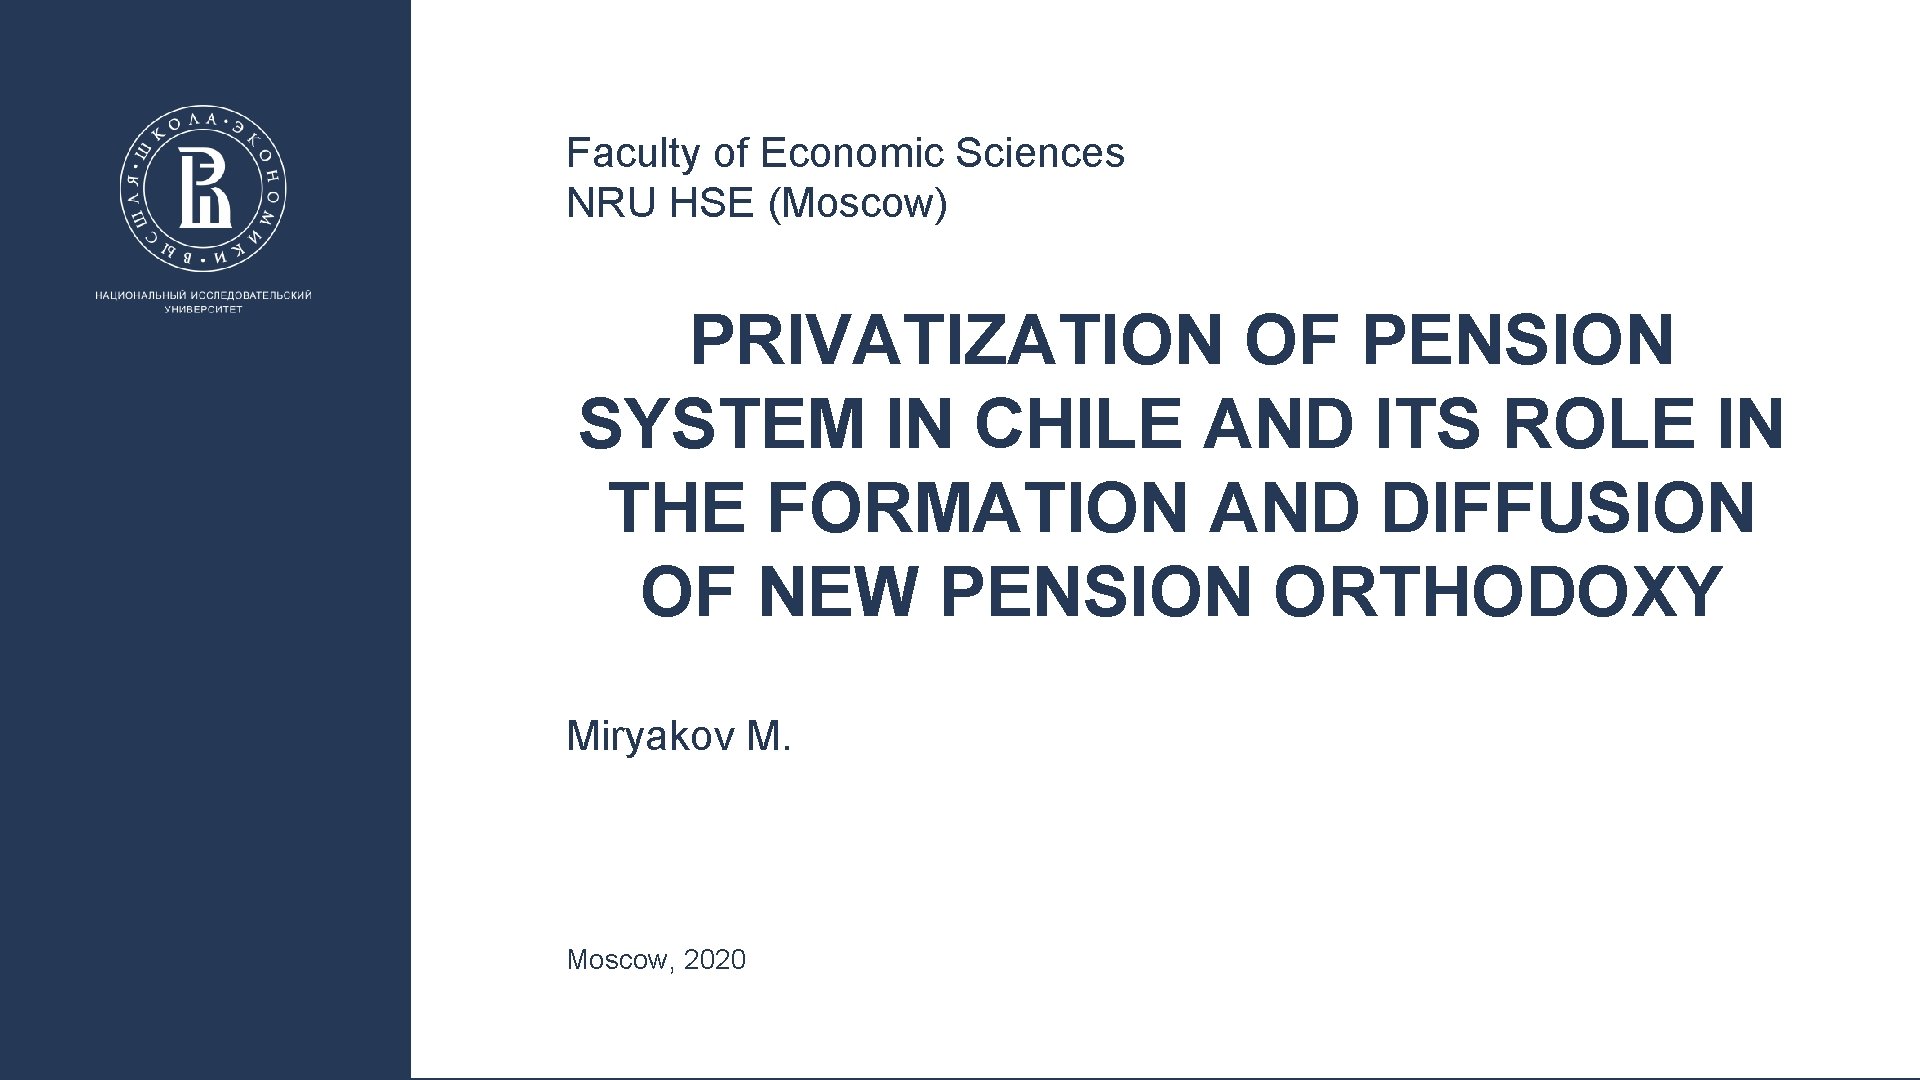 Faculty of Economic Sciences NRU HSE (Moscow) PRIVATIZATION OF PENSION SYSTEM IN CHILE AND